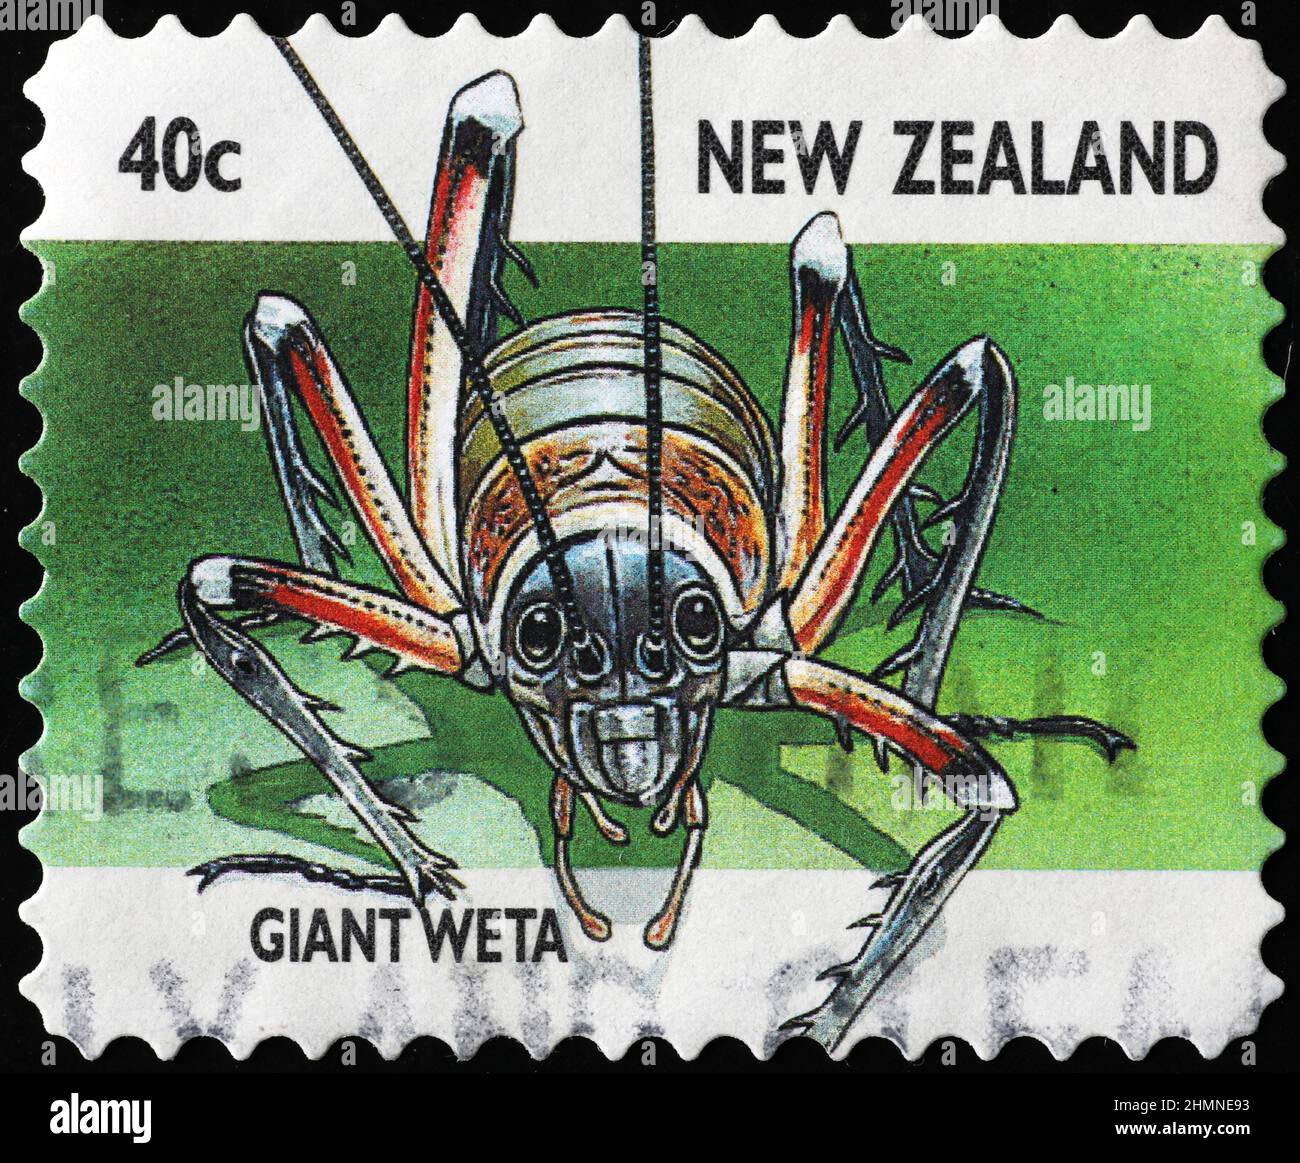 Giant weta, endemic insect of New Zealand on stamp Stock Photo